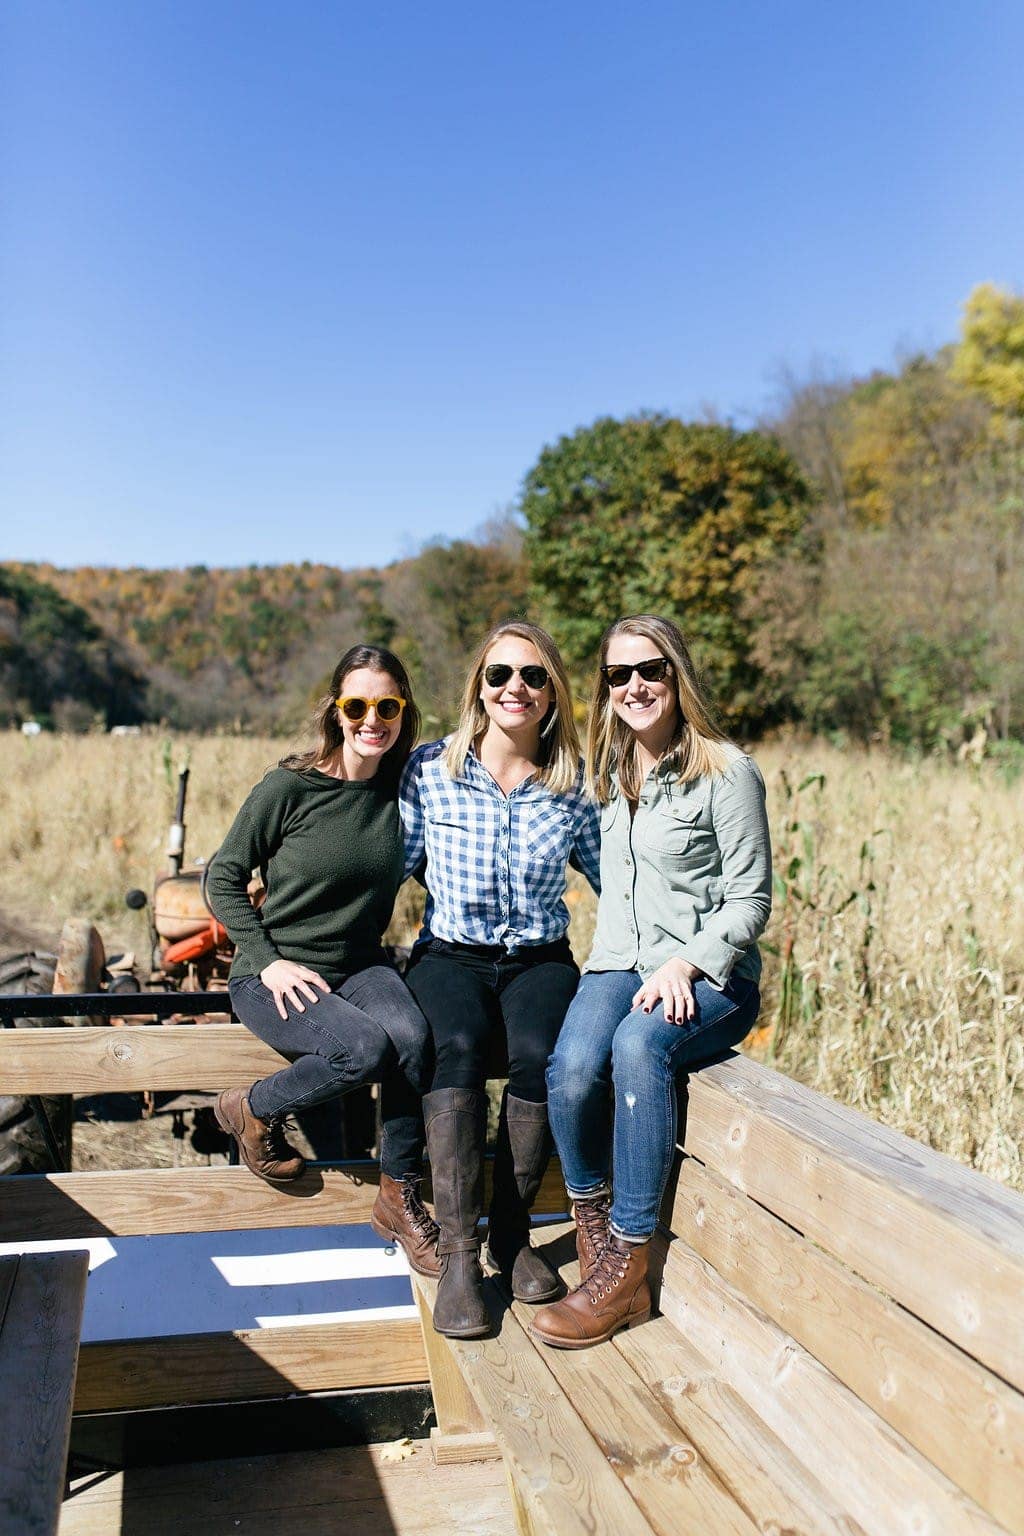 Want to know more about life on an Organic Valley Farm? In this post, you'll learn all about why we love Organic Valley Coop, as well as what it's like to run an Organic Valley Farm!